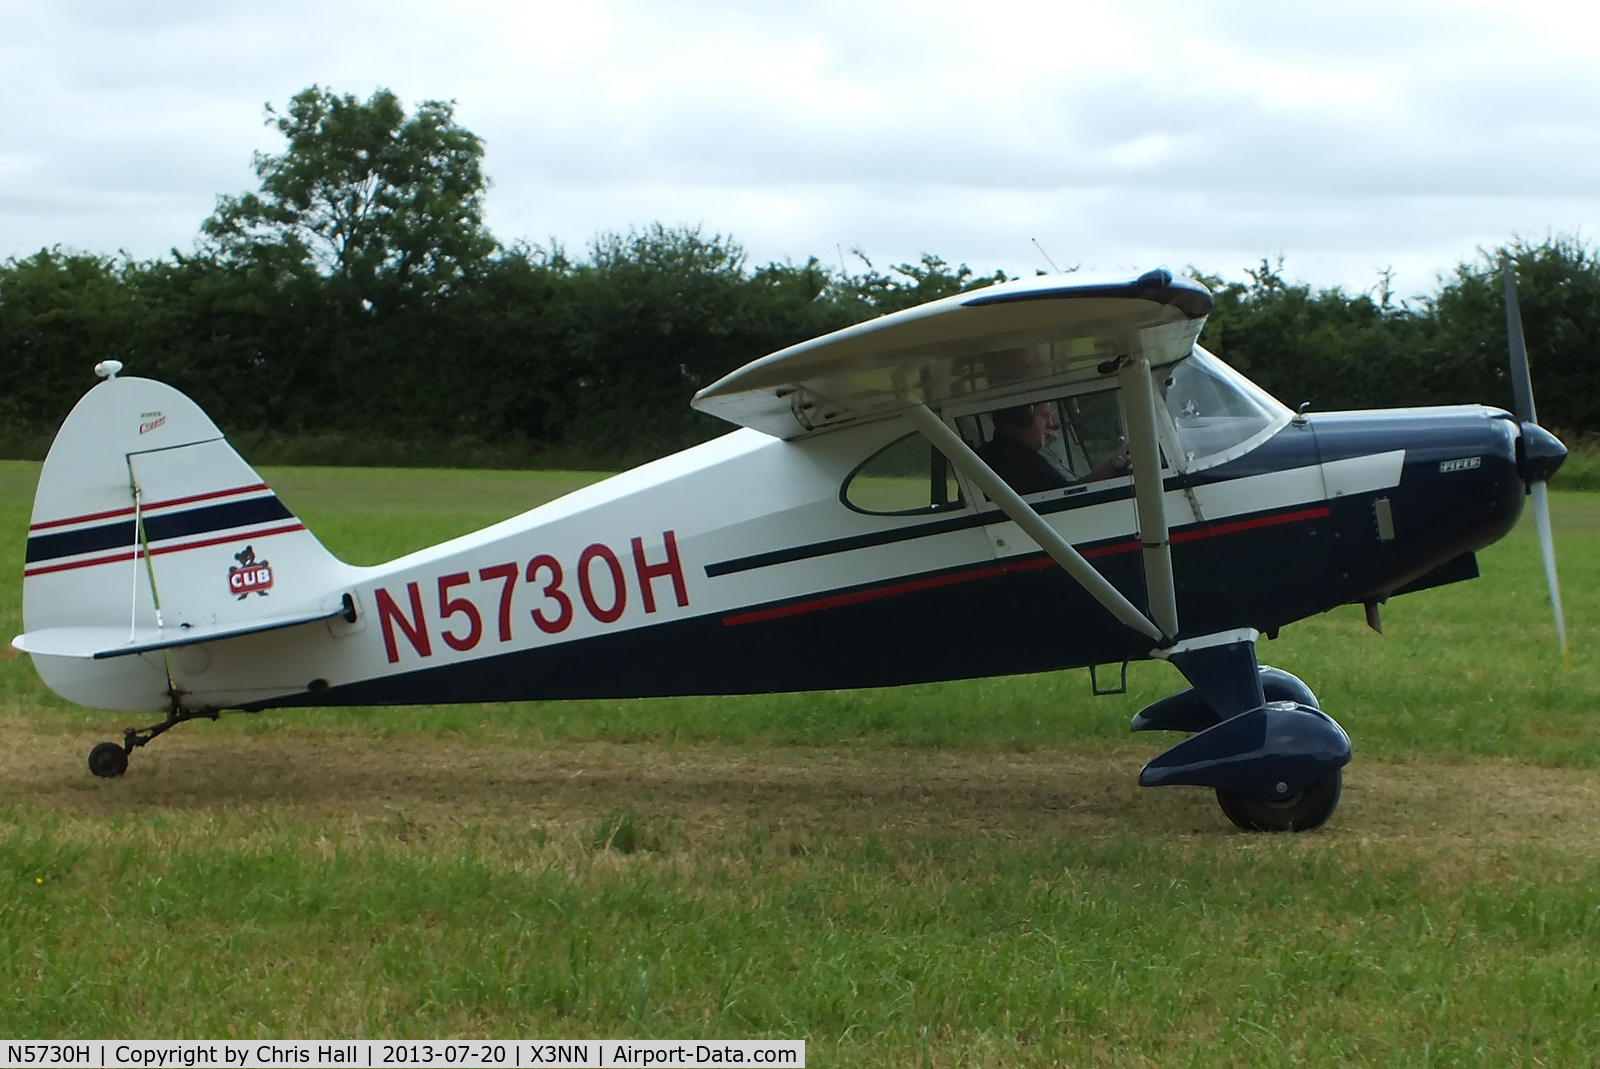 N5730H, 1949 Piper PA-16 Clipper C/N 16-342, at the Stoke Golding stakeout 2013